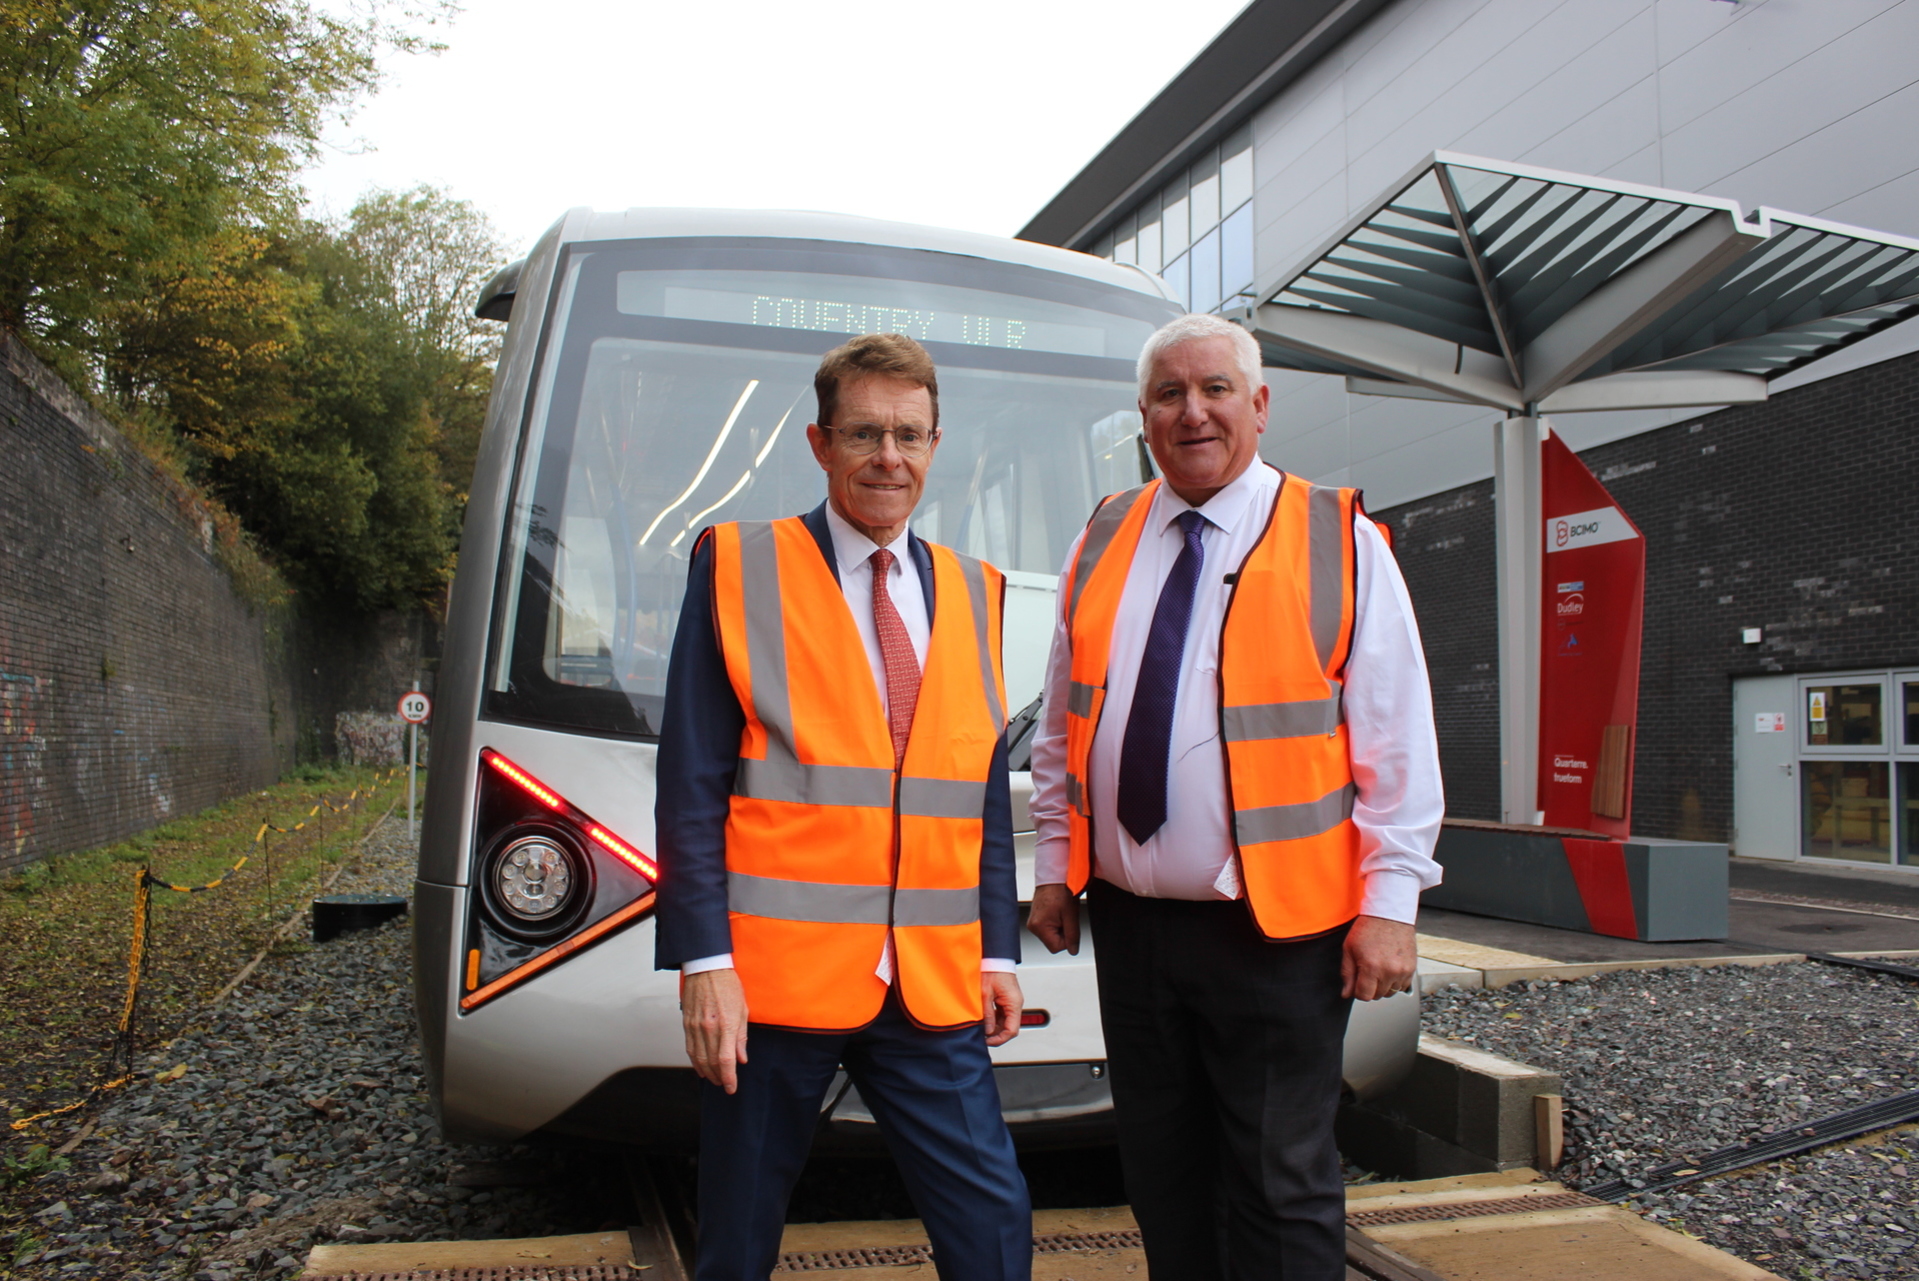 The Black Country Innovative Manufacturing Organisation (BCIMO) has hosted a successful demonstration of the pioneering Coventry Very Light Rail (CVLR) technology at its unique Rail Development and Test Site in Dudley in the West Midlands.